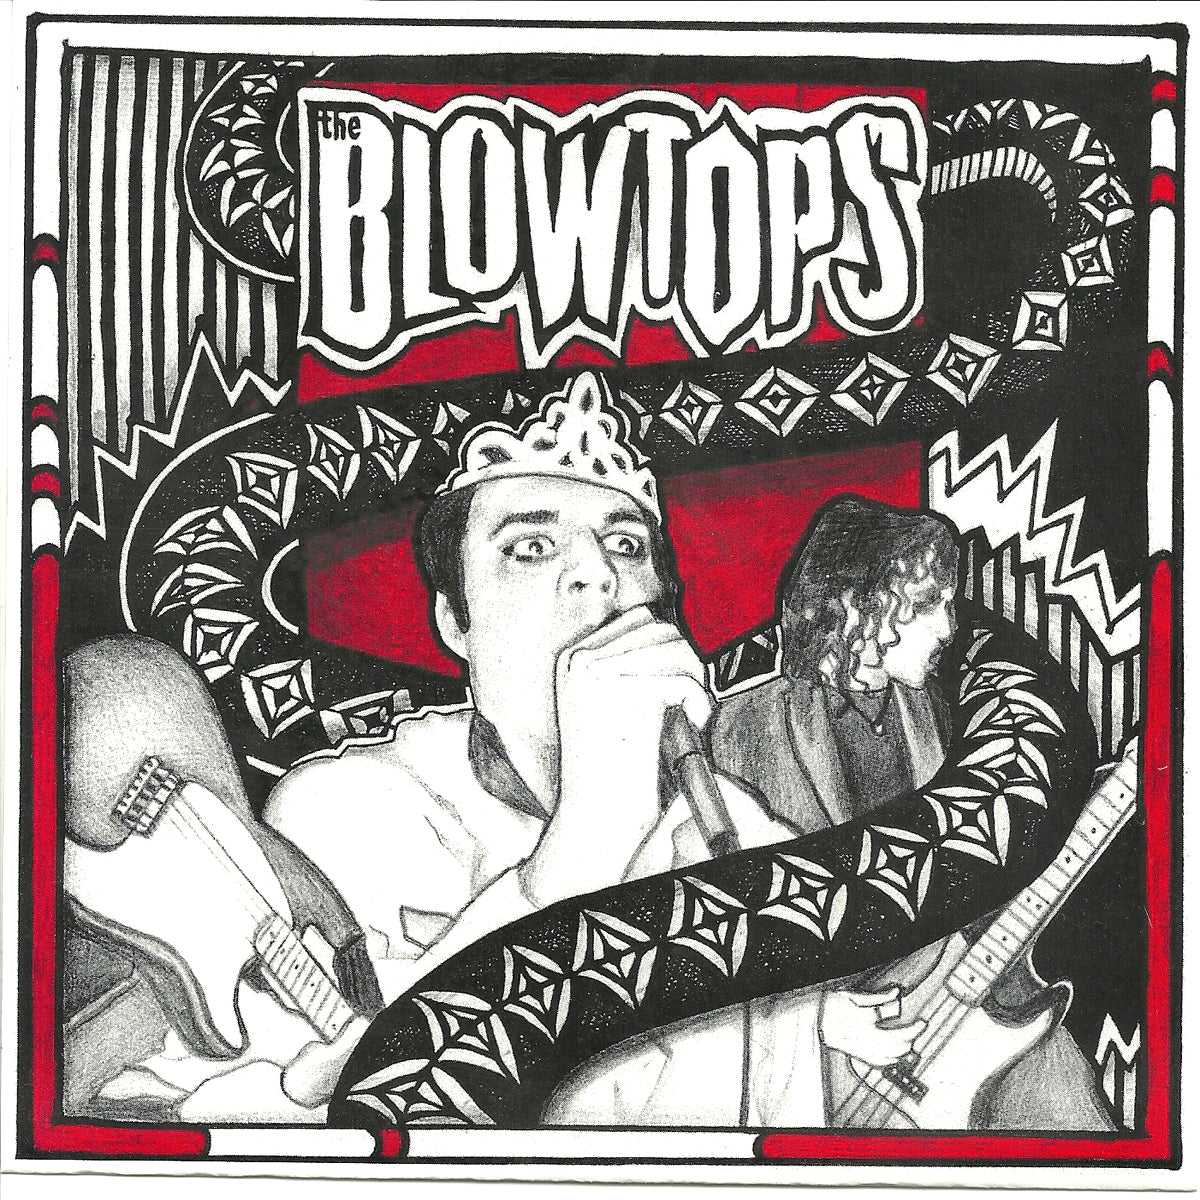 The Blowtops- Surgeon’s Hands 7" ~RECORDED BY JAY REATARD!